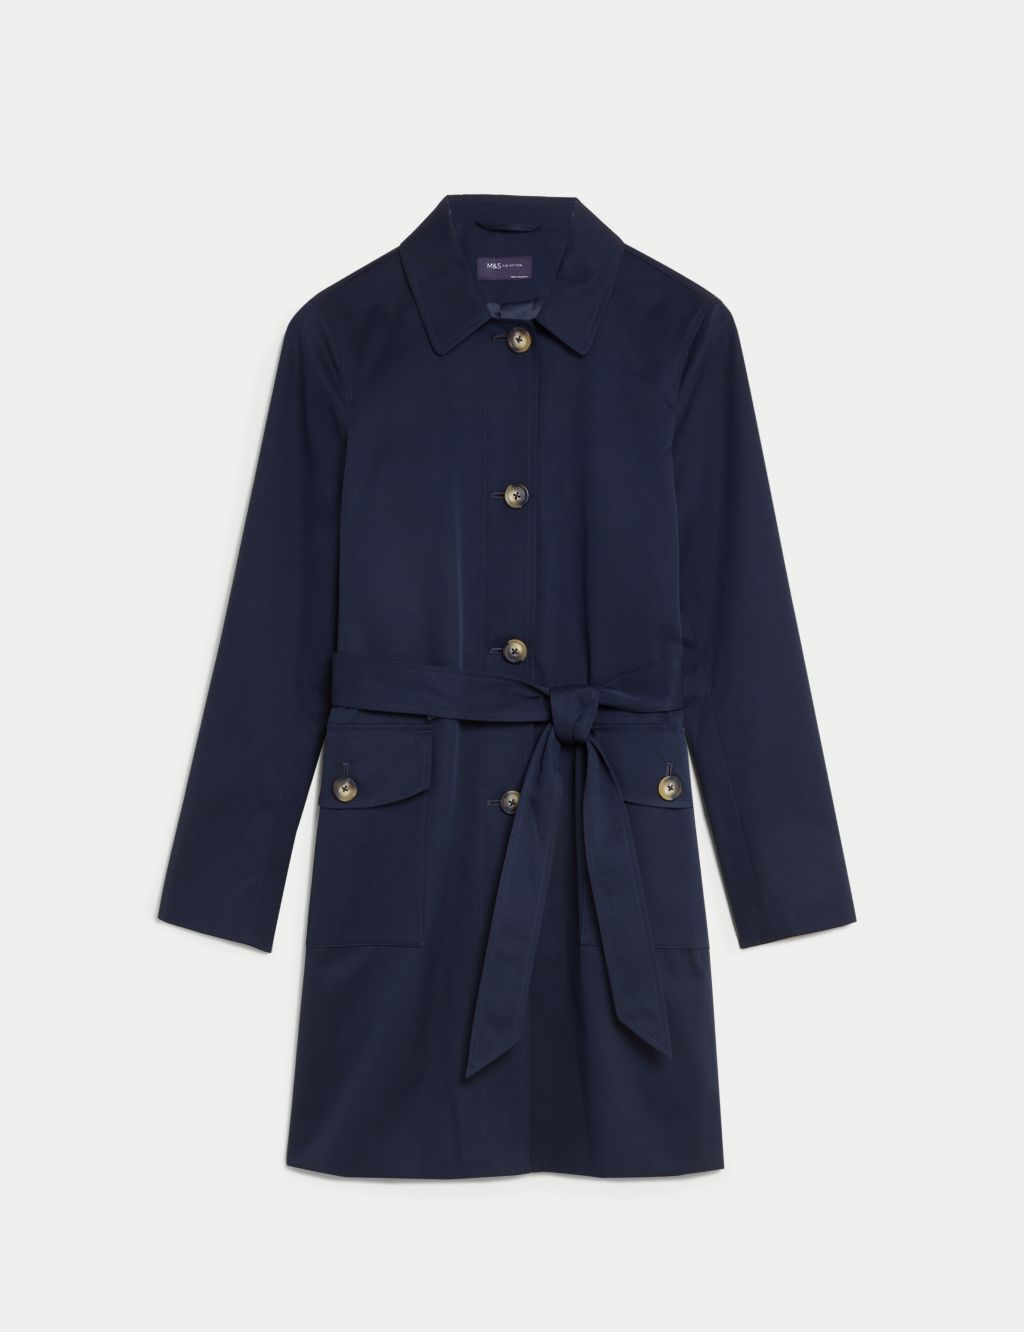 Cotton Blend Belted Trench Coat image 2